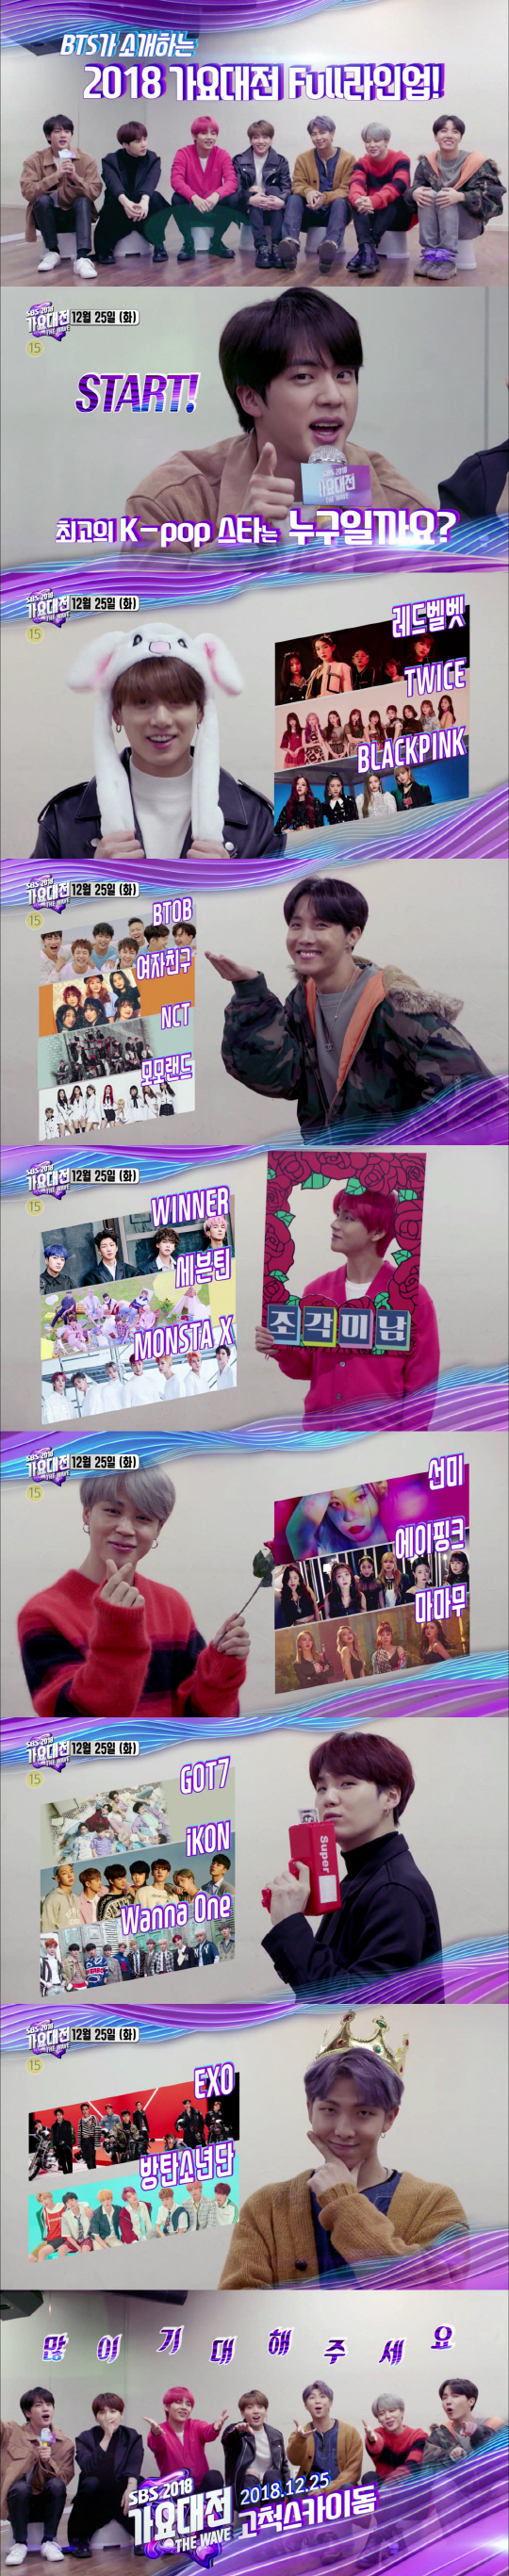 Today (9th) Inkigayo will be unveiled 2018 SBS Song Daejeon FULL Lineup introduced by BTS.Following the release of the first and second lineup of 2018 SBS Song Daejeon, BTS will appear as a guide to introduce the entire lineup.BTS Jean raised the expectation of 2018 SBS song Daejeon with the question Who is the best k-pop star of the year?Nowadays, the government wearing a nuclear ins tem rabbit hat announced the appearance of Red Velvet, Twice, Black Pink, Smile Angel Jay Hop Bitubi, Girlfriend, NCT, Momo Land and Winner, Seventeen, Monster X did.Ji Min, who was in a cute heart attack with a cute heart, introduced Stern, A Pink, Mama, Sugar with money gun introduced GOT7, iKON, Wanna One, and the eldest brother RM introduced EXO, BTS.As a result, 18 teams of k-pop stars in Korea Choi Jing, who named 2018 SBS Song Daejeon, have been completed. The 2018 SBS Song Daejeon FULL Lineup video introduced by BTS will be released for the first time during Inkigayo broadcast today.On the other hand, 2018 SBS Song Daejeon, which will come like a Christmas gift on the 25th (Tuesday), will write a lot of records during the year on THE WAVE and will look at the flow of K-POP and Korean Wave with singers who have reached their peak.The 2018 SBS Song Daejeon, the biggest festival of the year, will be broadcast live on the 25th (Fahrenheit) at the Gocheok Sky Dome in Seoul.